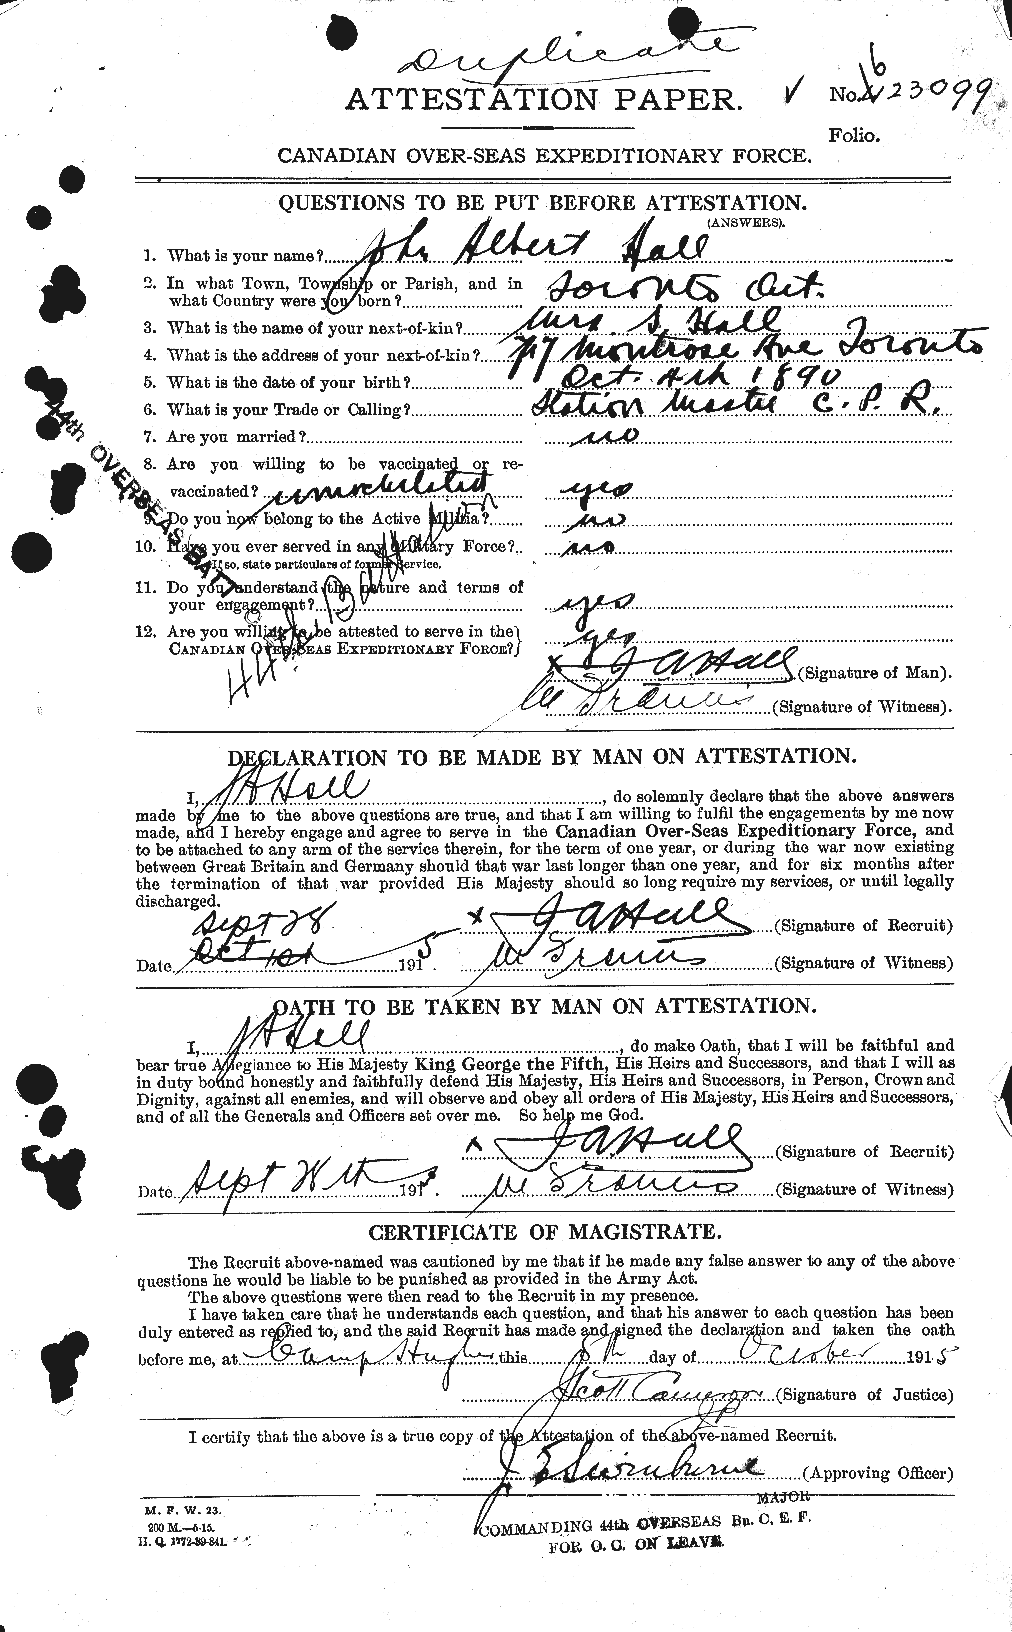 Personnel Records of the First World War - CEF 374265a